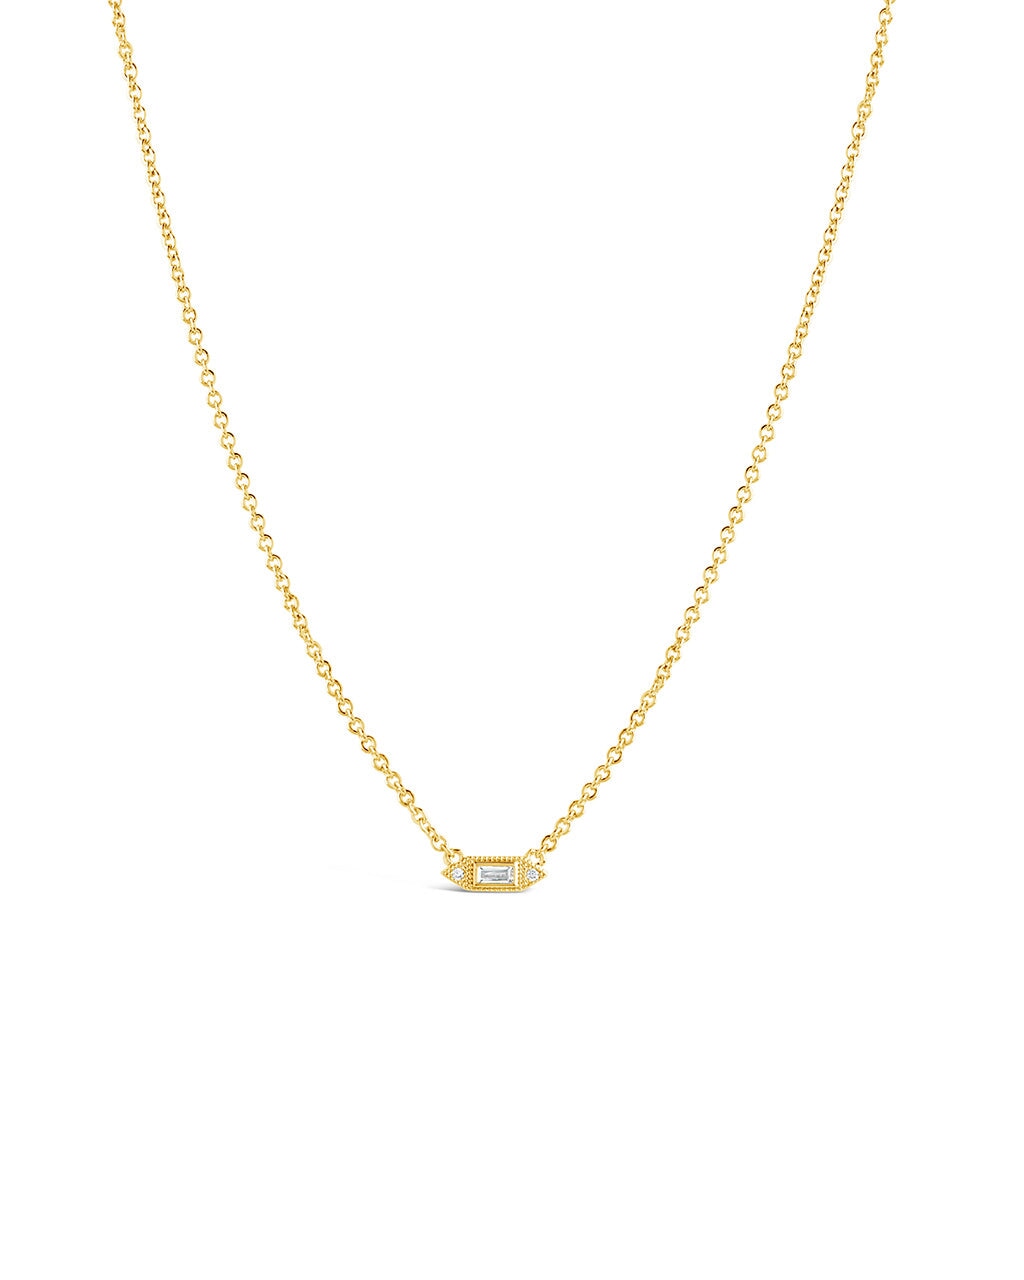 Elongated Diamond CZ Pendant Necklace Necklace Sterling Forever Gold 